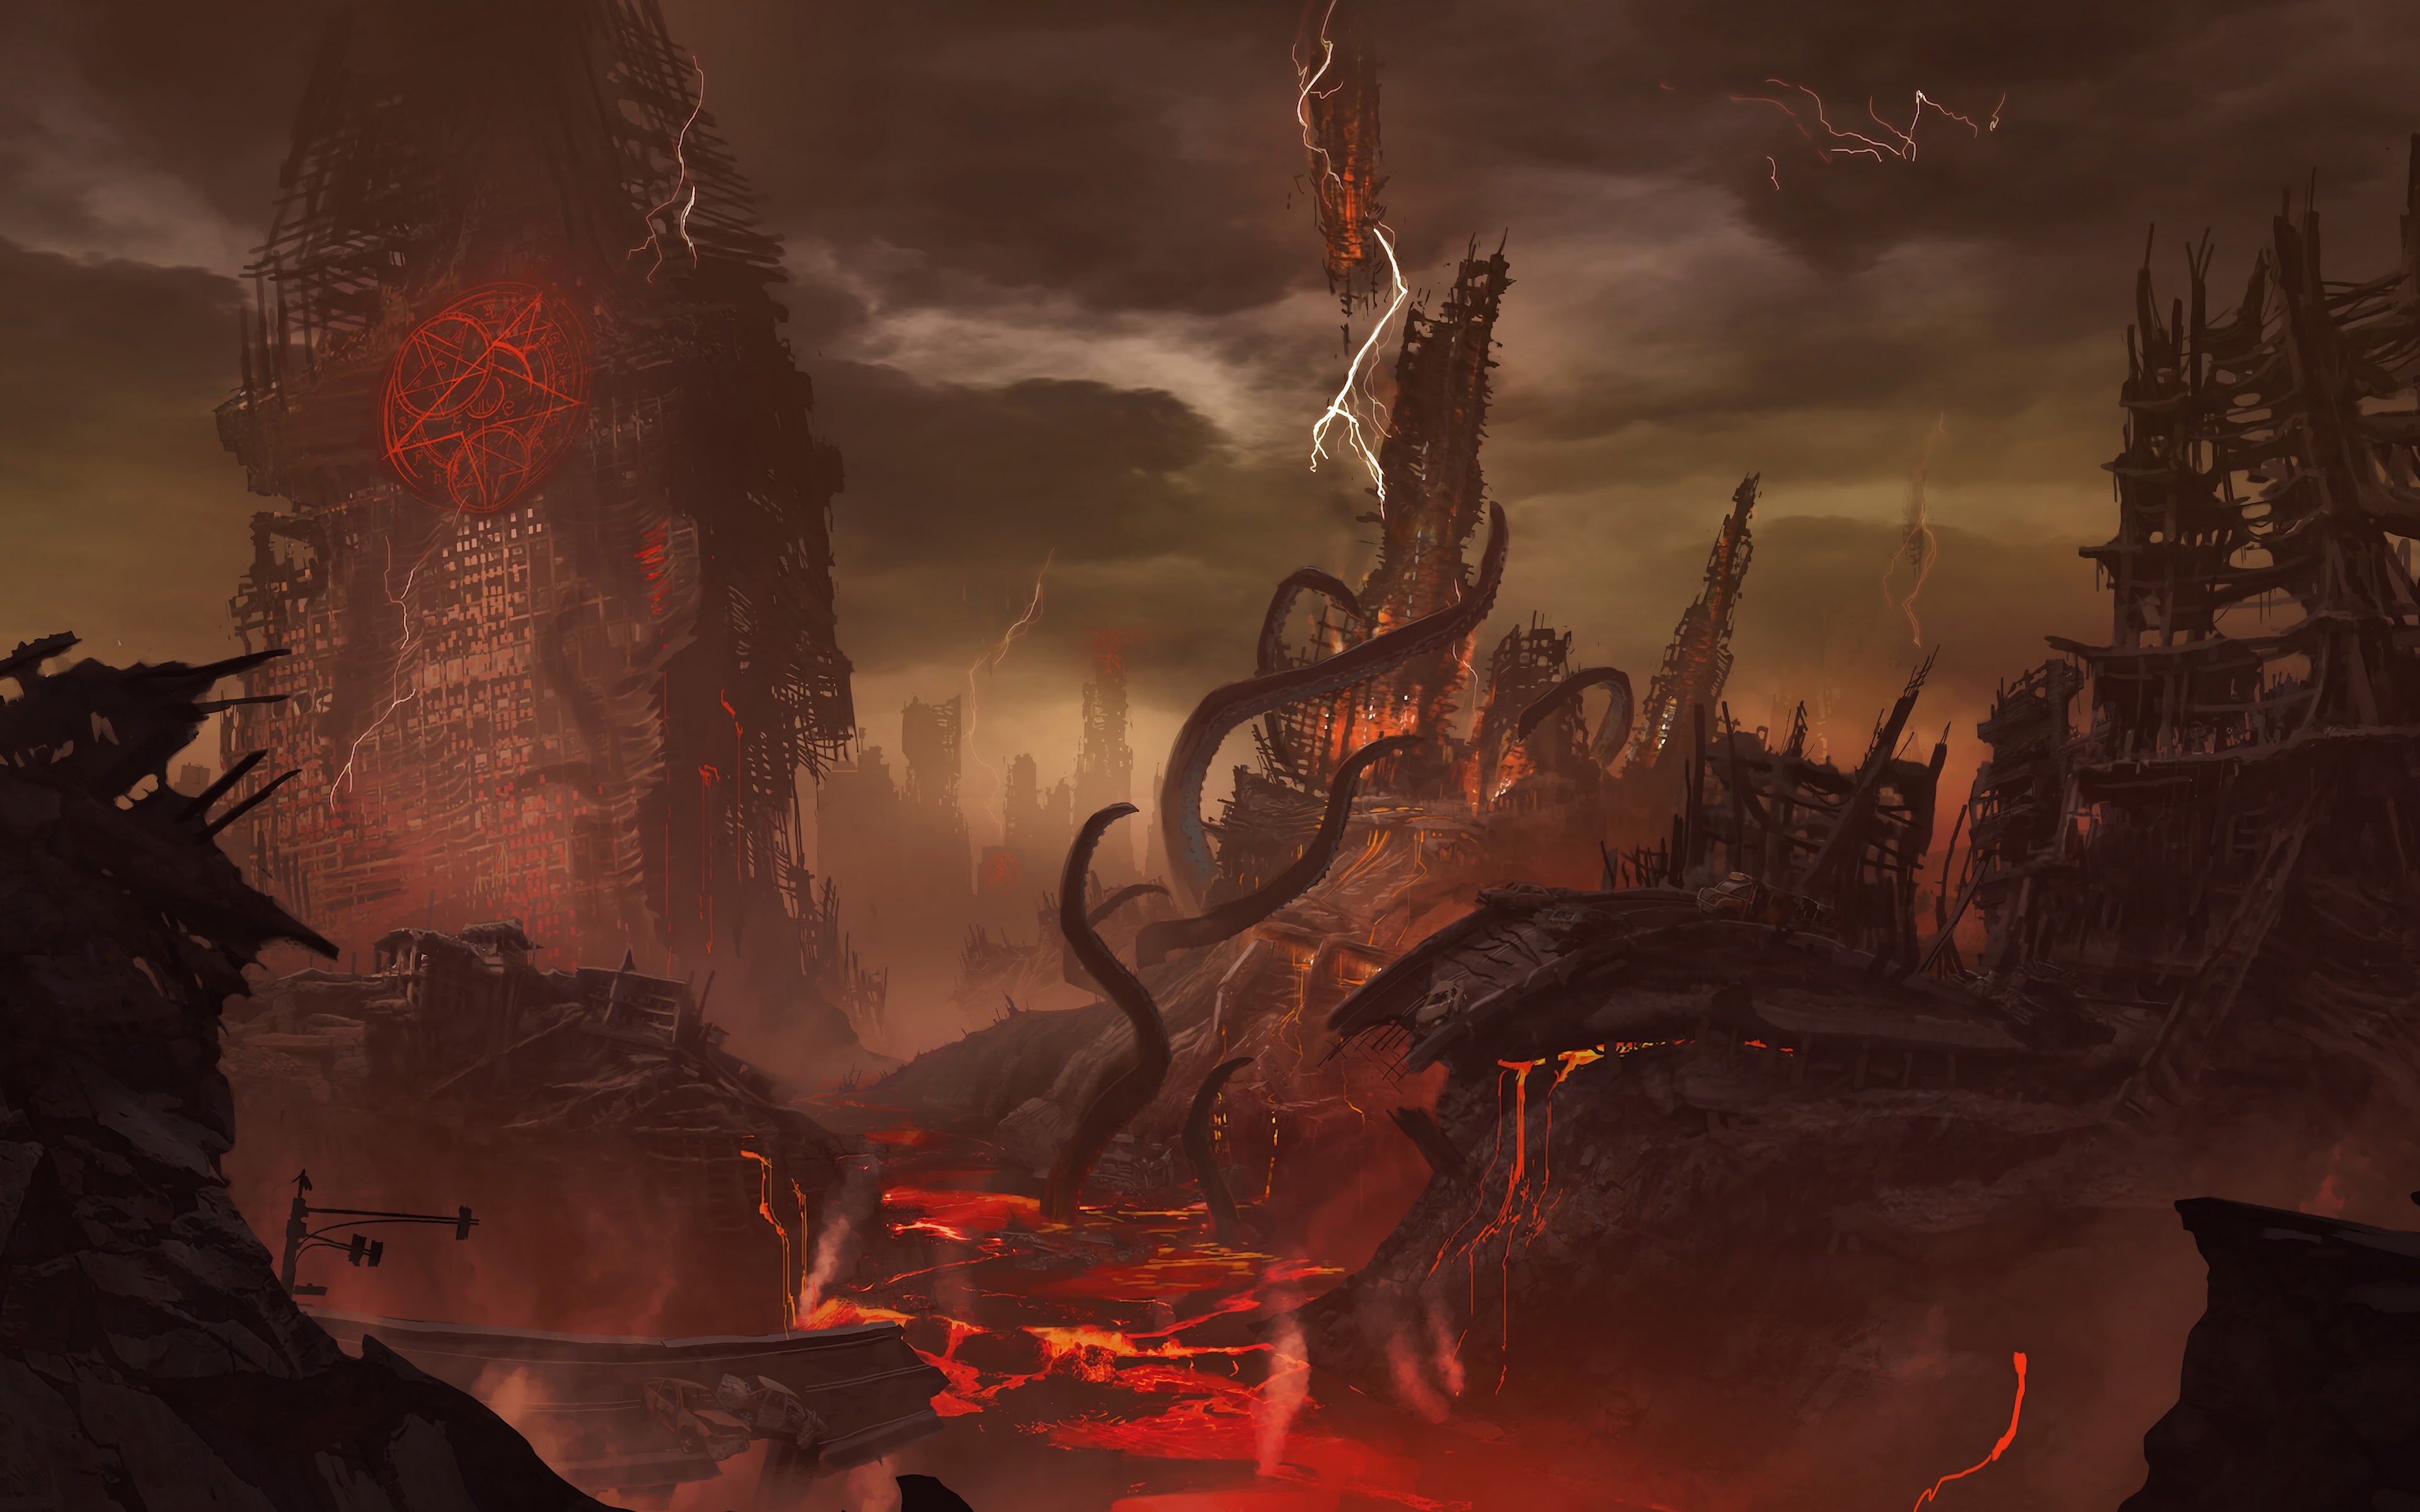 HD Wallpapers The Gates Of Hell - Wallpaper Cave